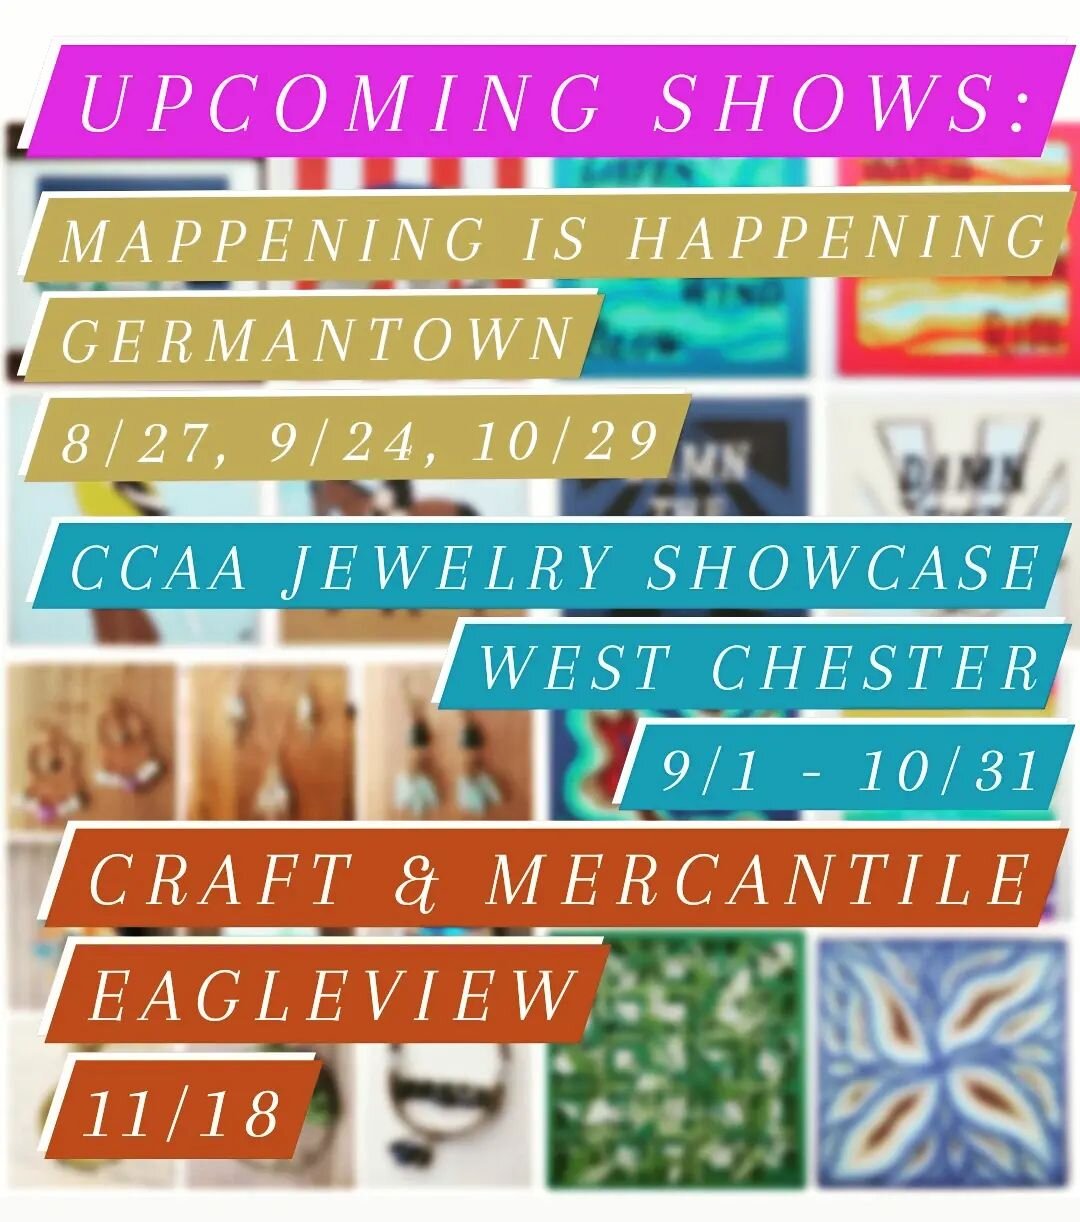 Upcoming shows, starting this Saturday!!!
Link in bio to my calendar for more details 🗓🥳
Summary:
*Saturdays 8/27, 9/24 and 10/29 are in Germantown for the Mappening is Happening
*All September and October you can find my jewelry at the Chester Cou